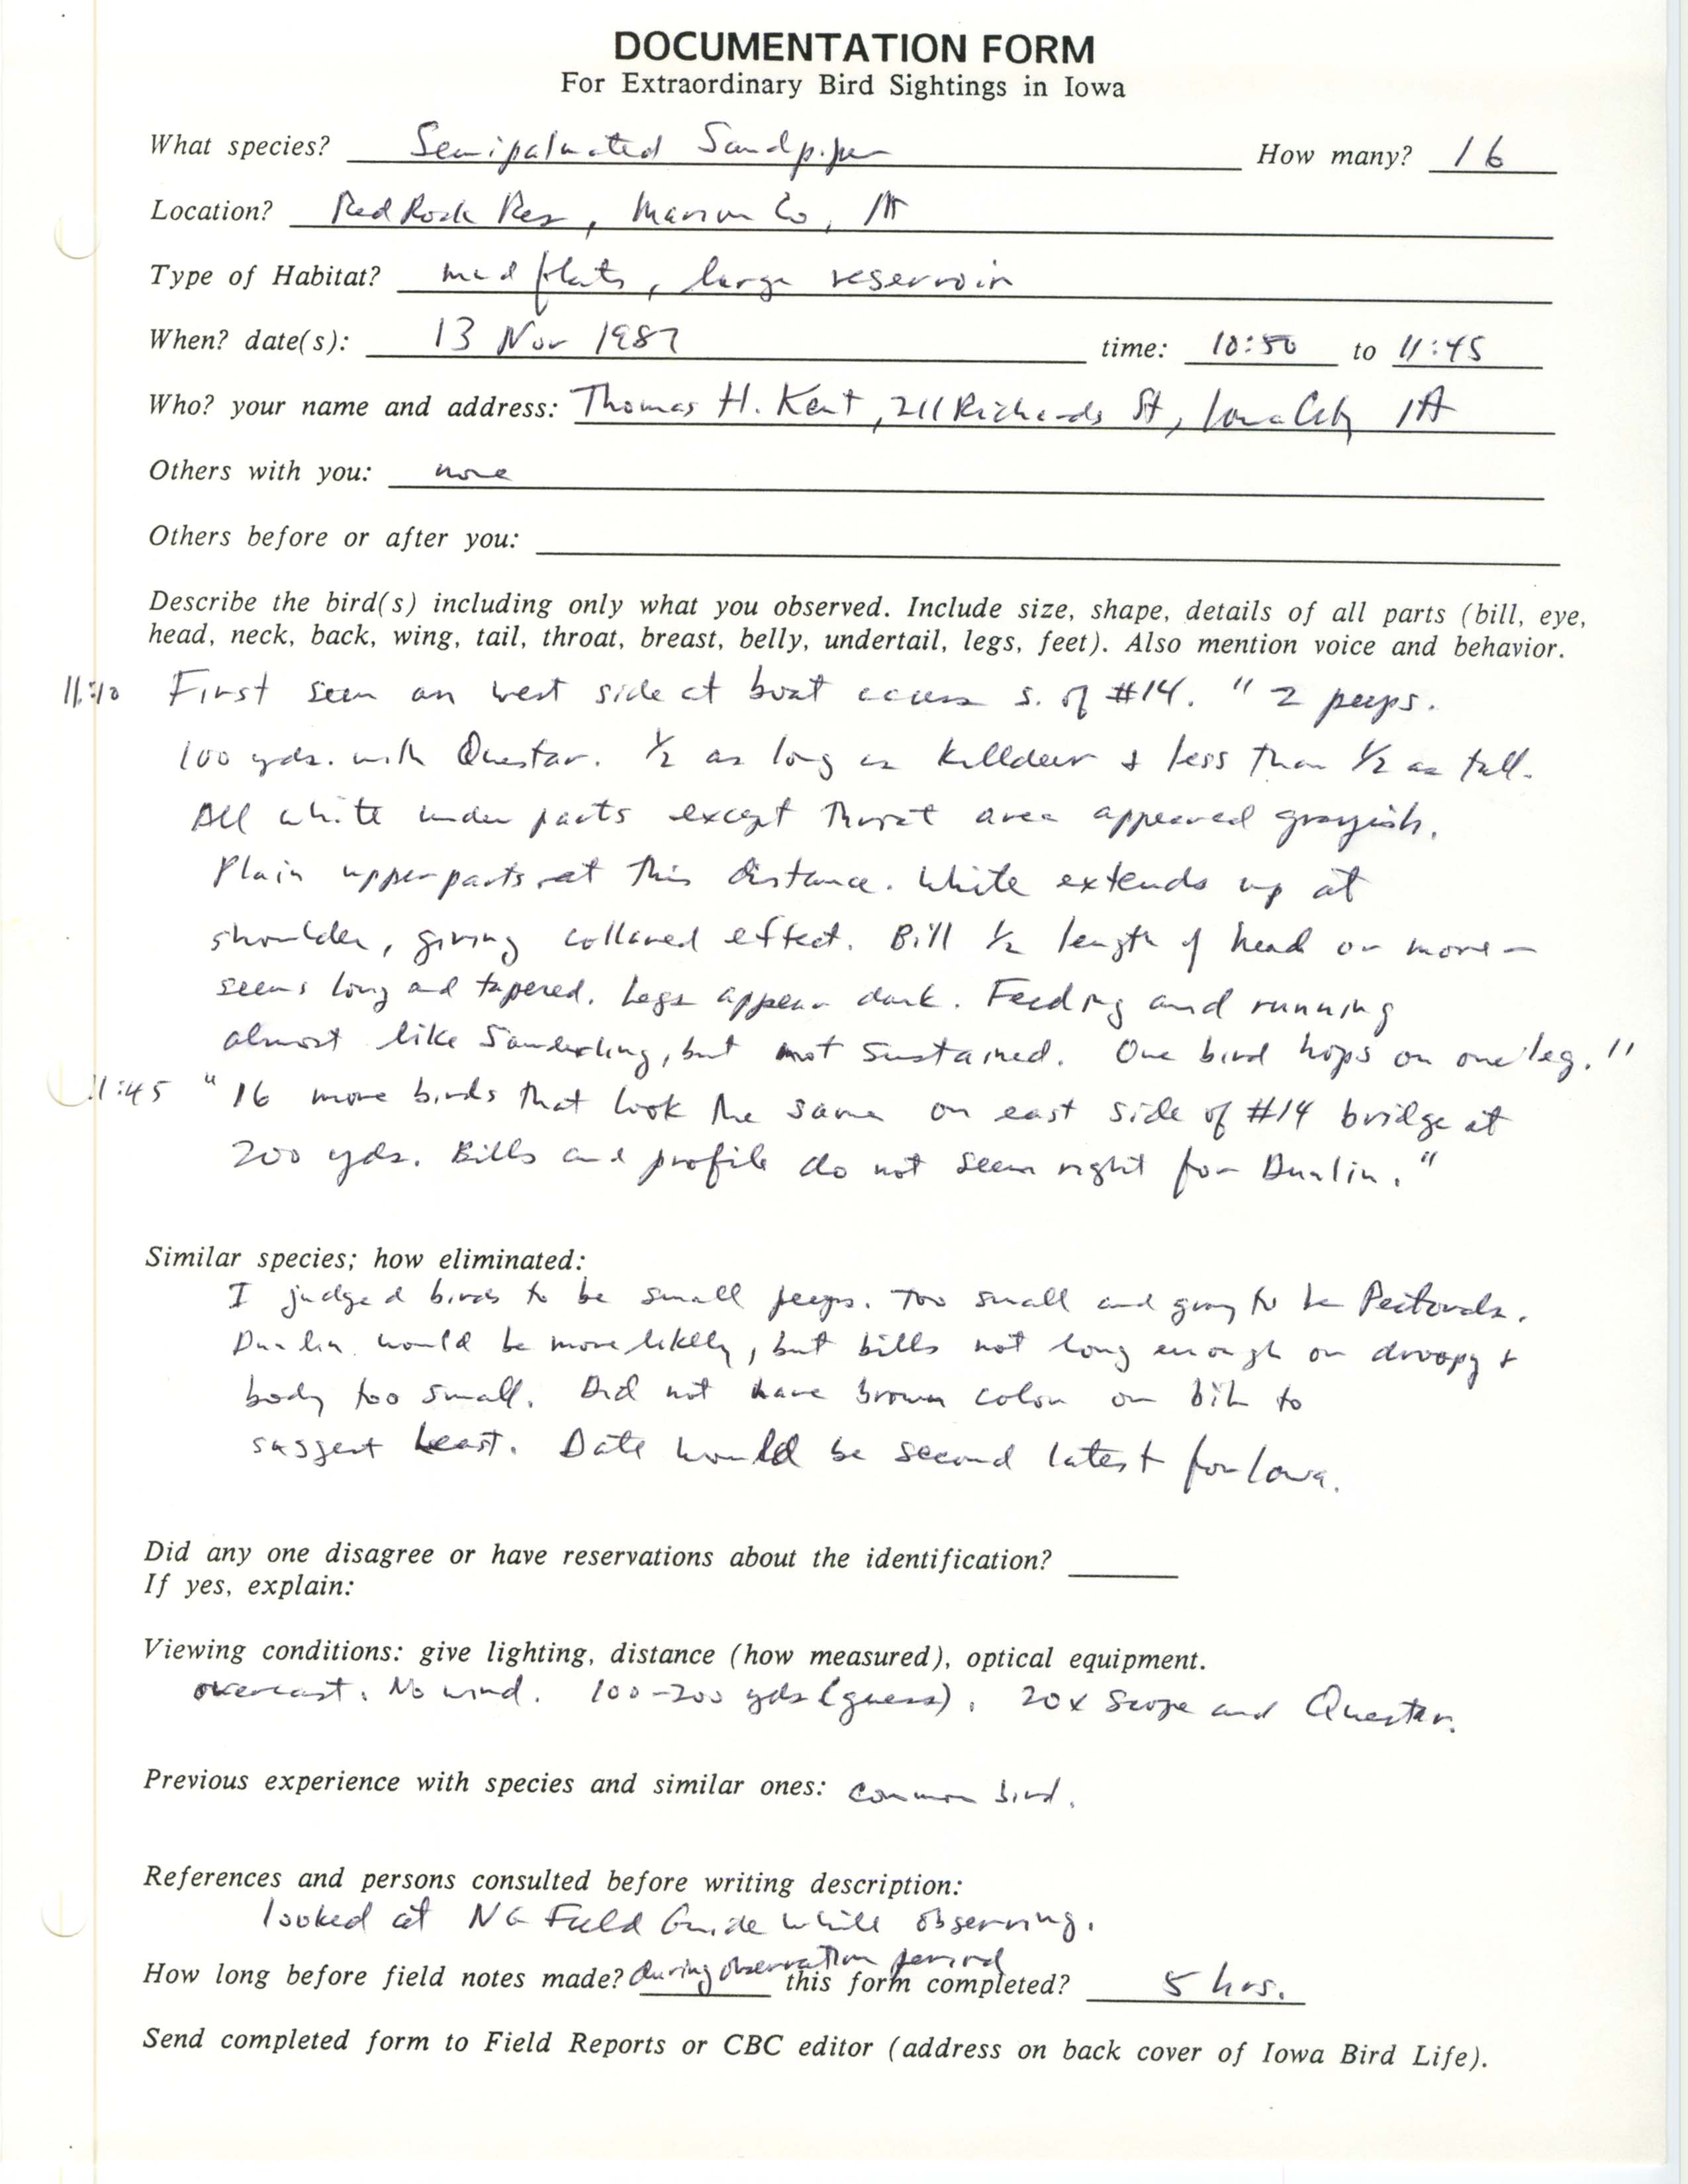 Rare bird documentation form for Semipalmated Sandpiper at Red Rock Reservoir, 1987